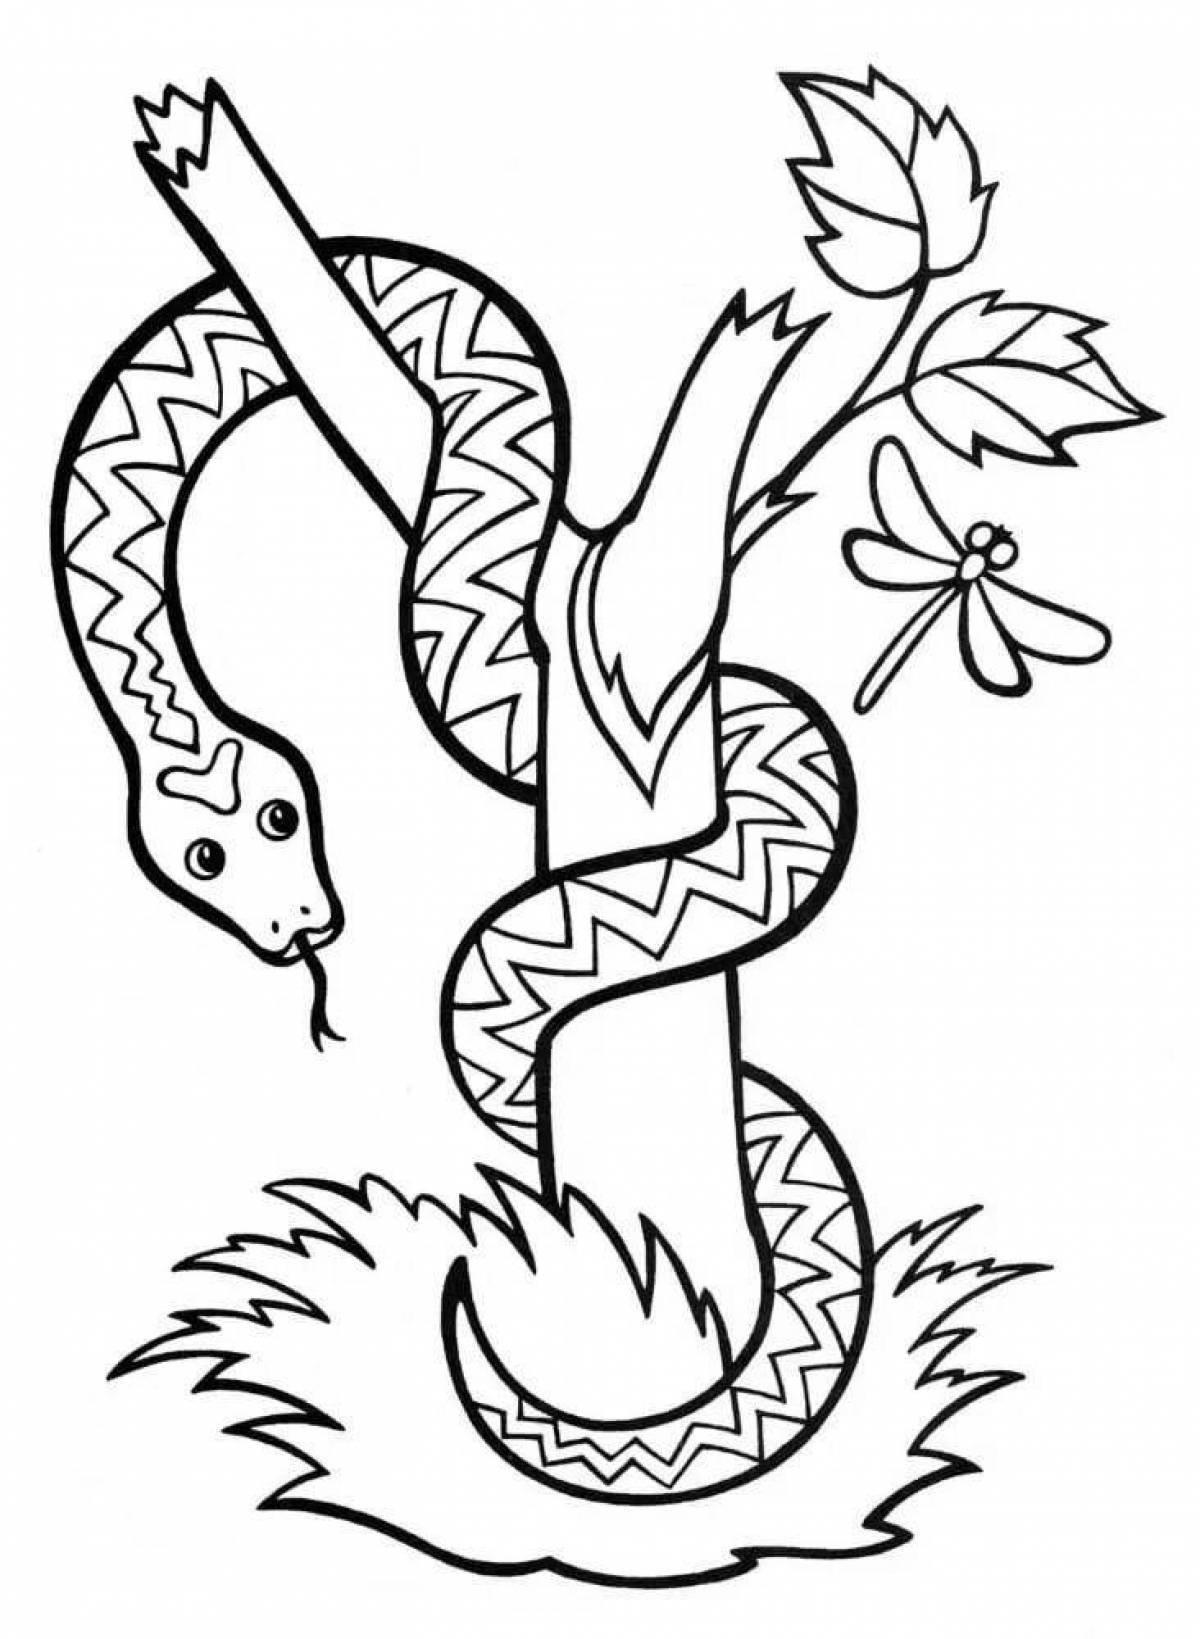 Coloring page graceful viper